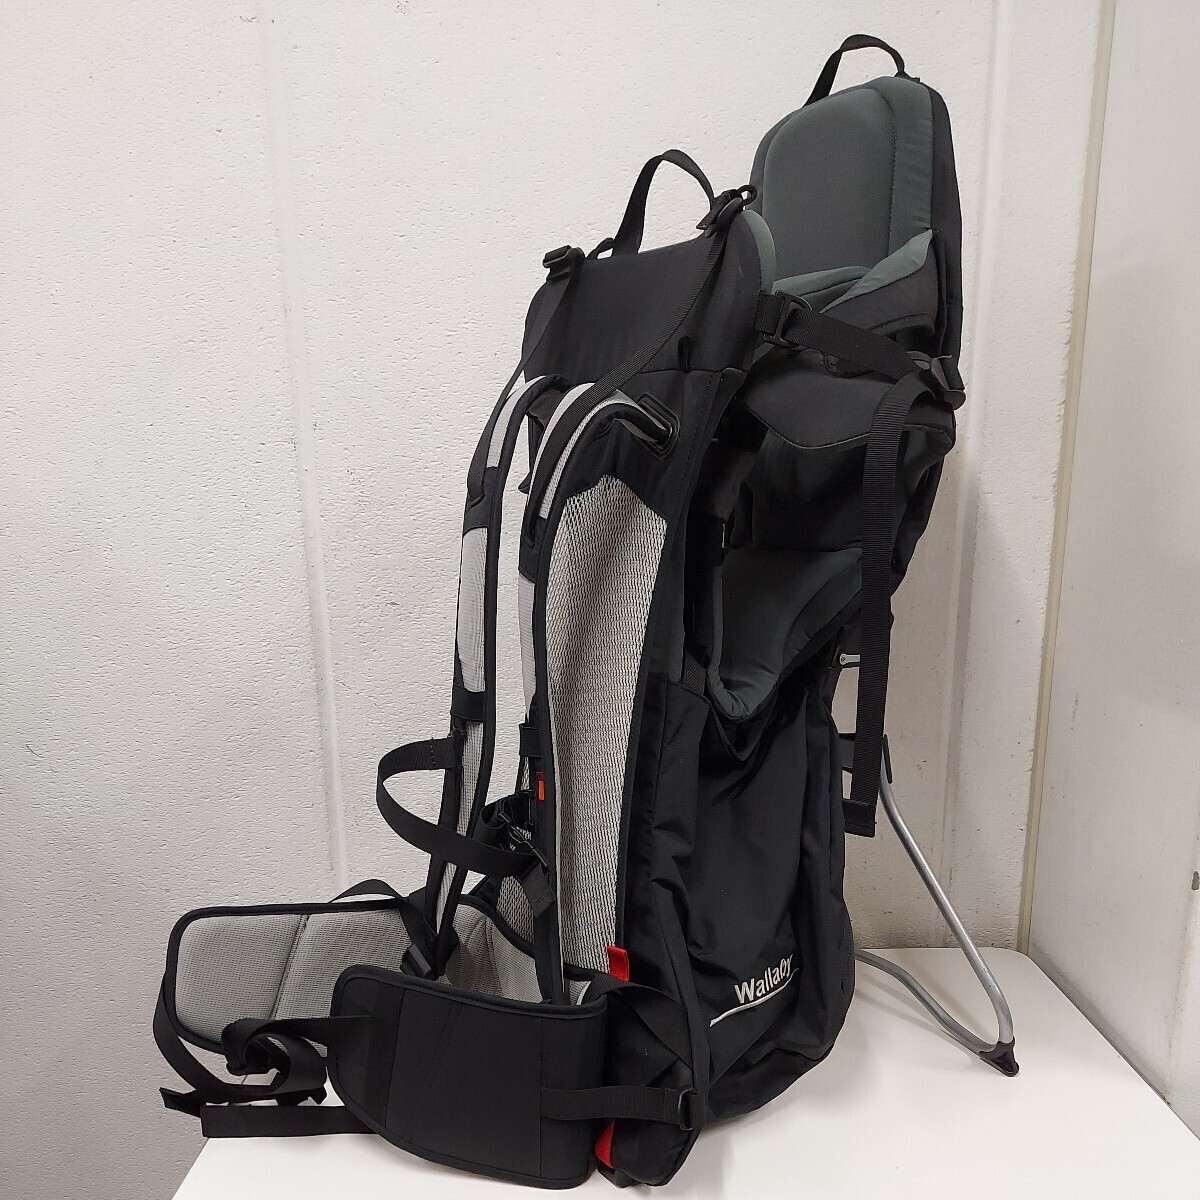 * superior article VAUDE/fa ude WALLABY/wala Be * baby carry / child carrier / baby carrier * mountain climbing / high King outdoor light weight rack for carrying loads *